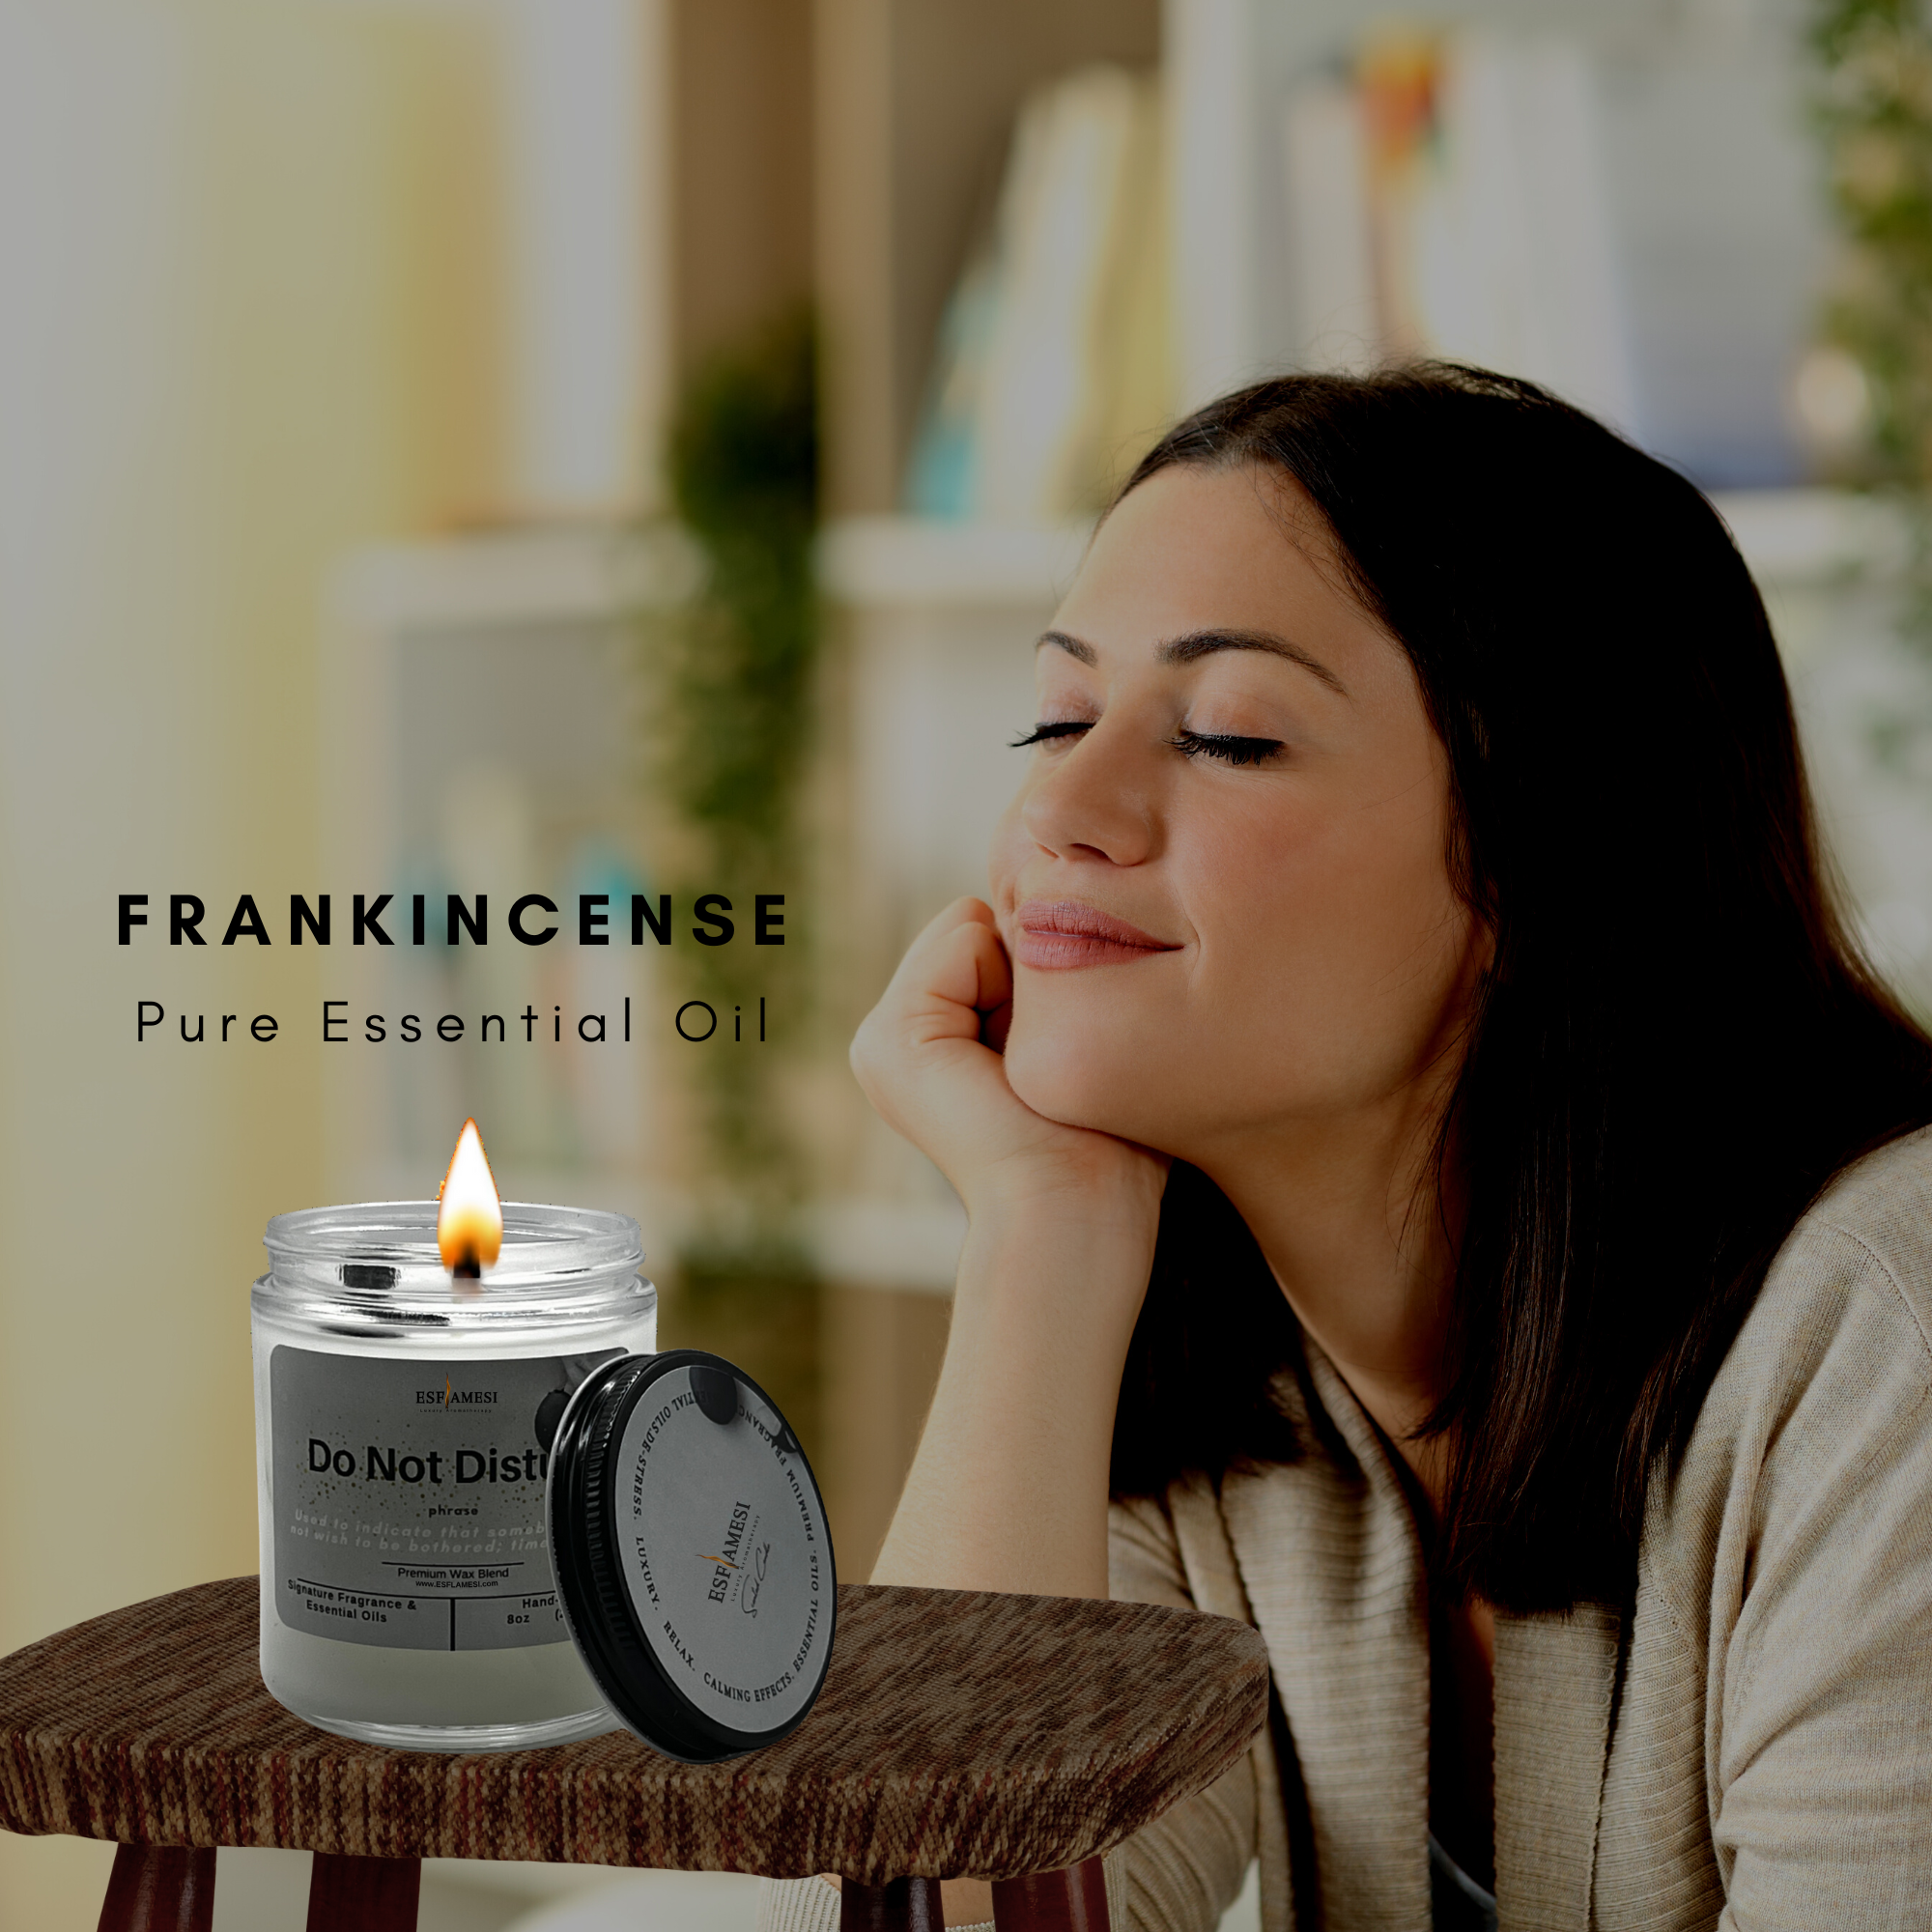 Scented Candle - Frankincense and Lavender "Do Not Disturb" Aromatherapy Candles